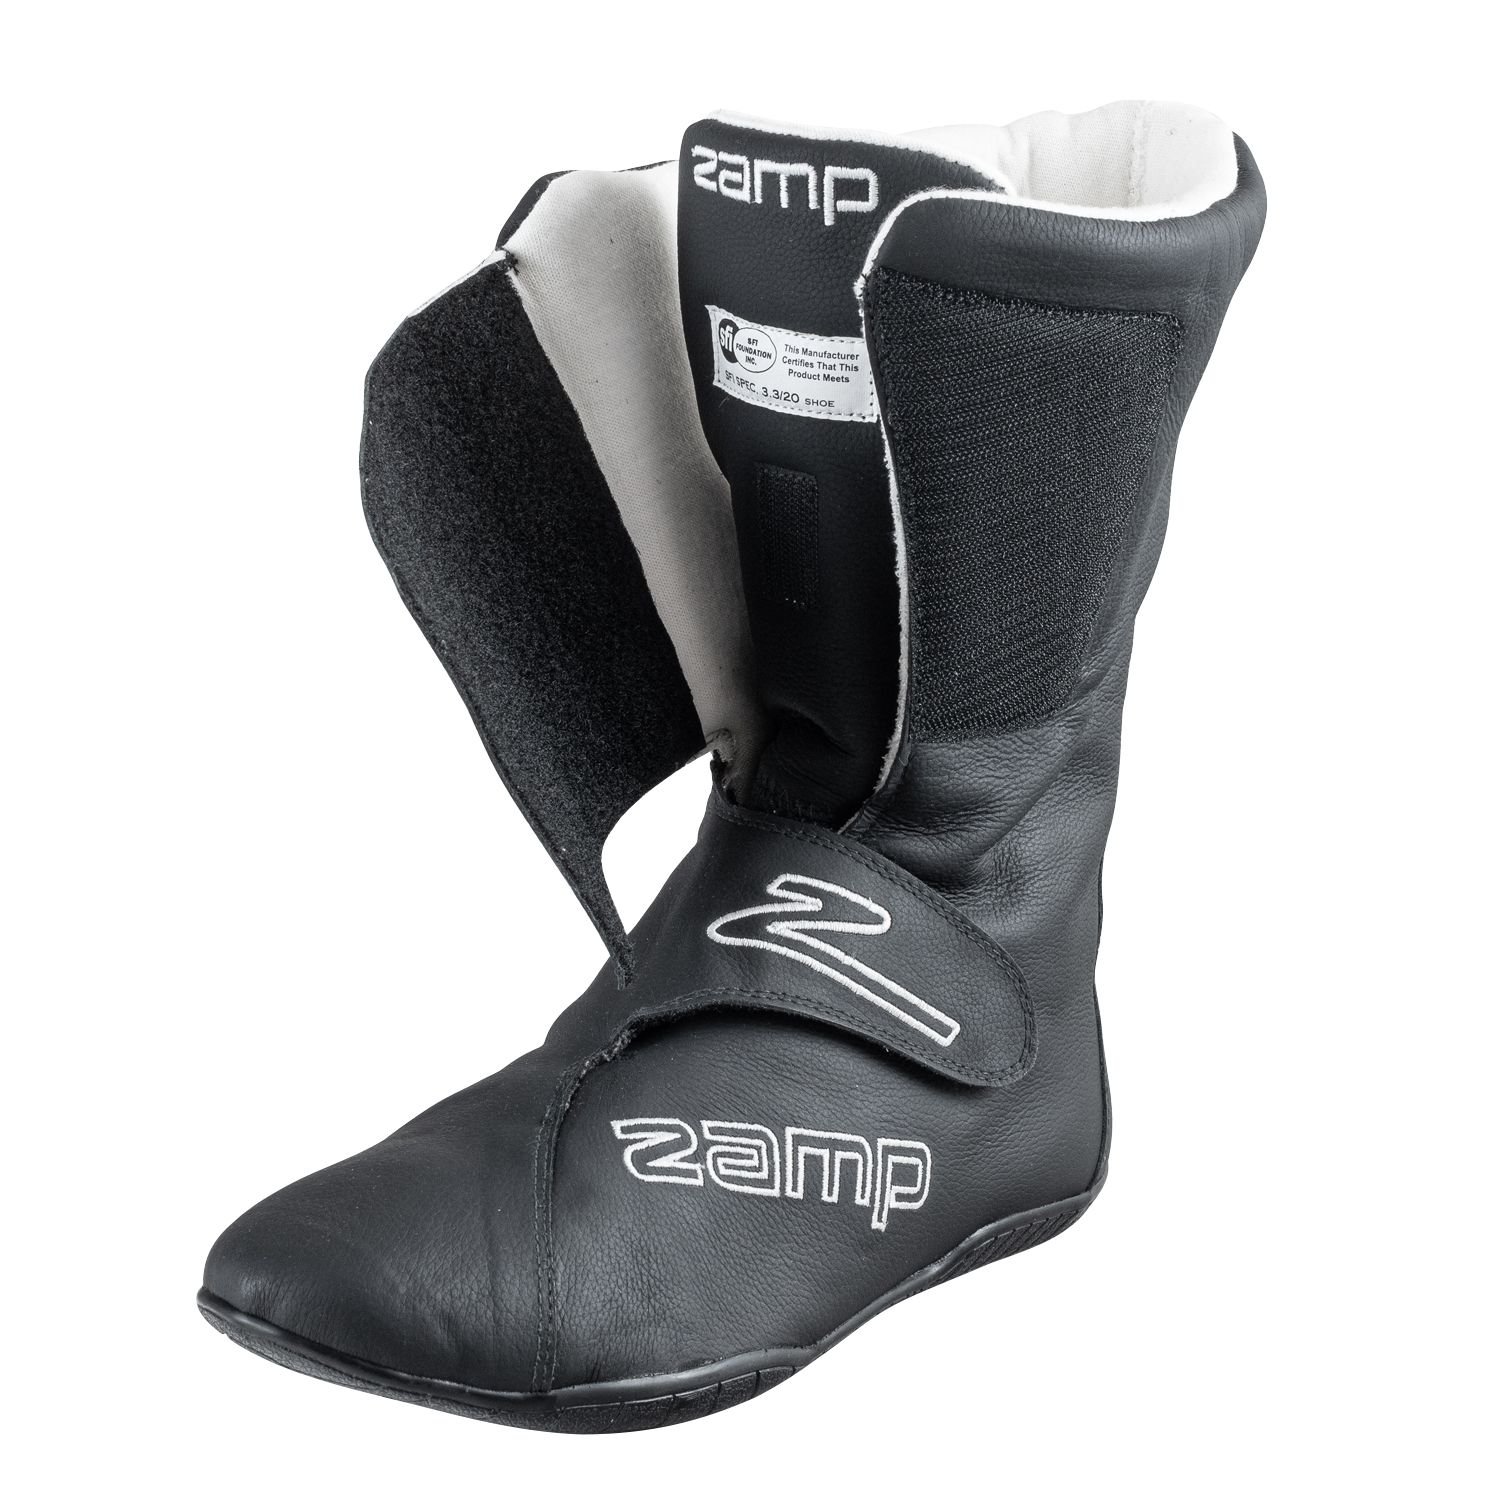 ZR-Drag Boots